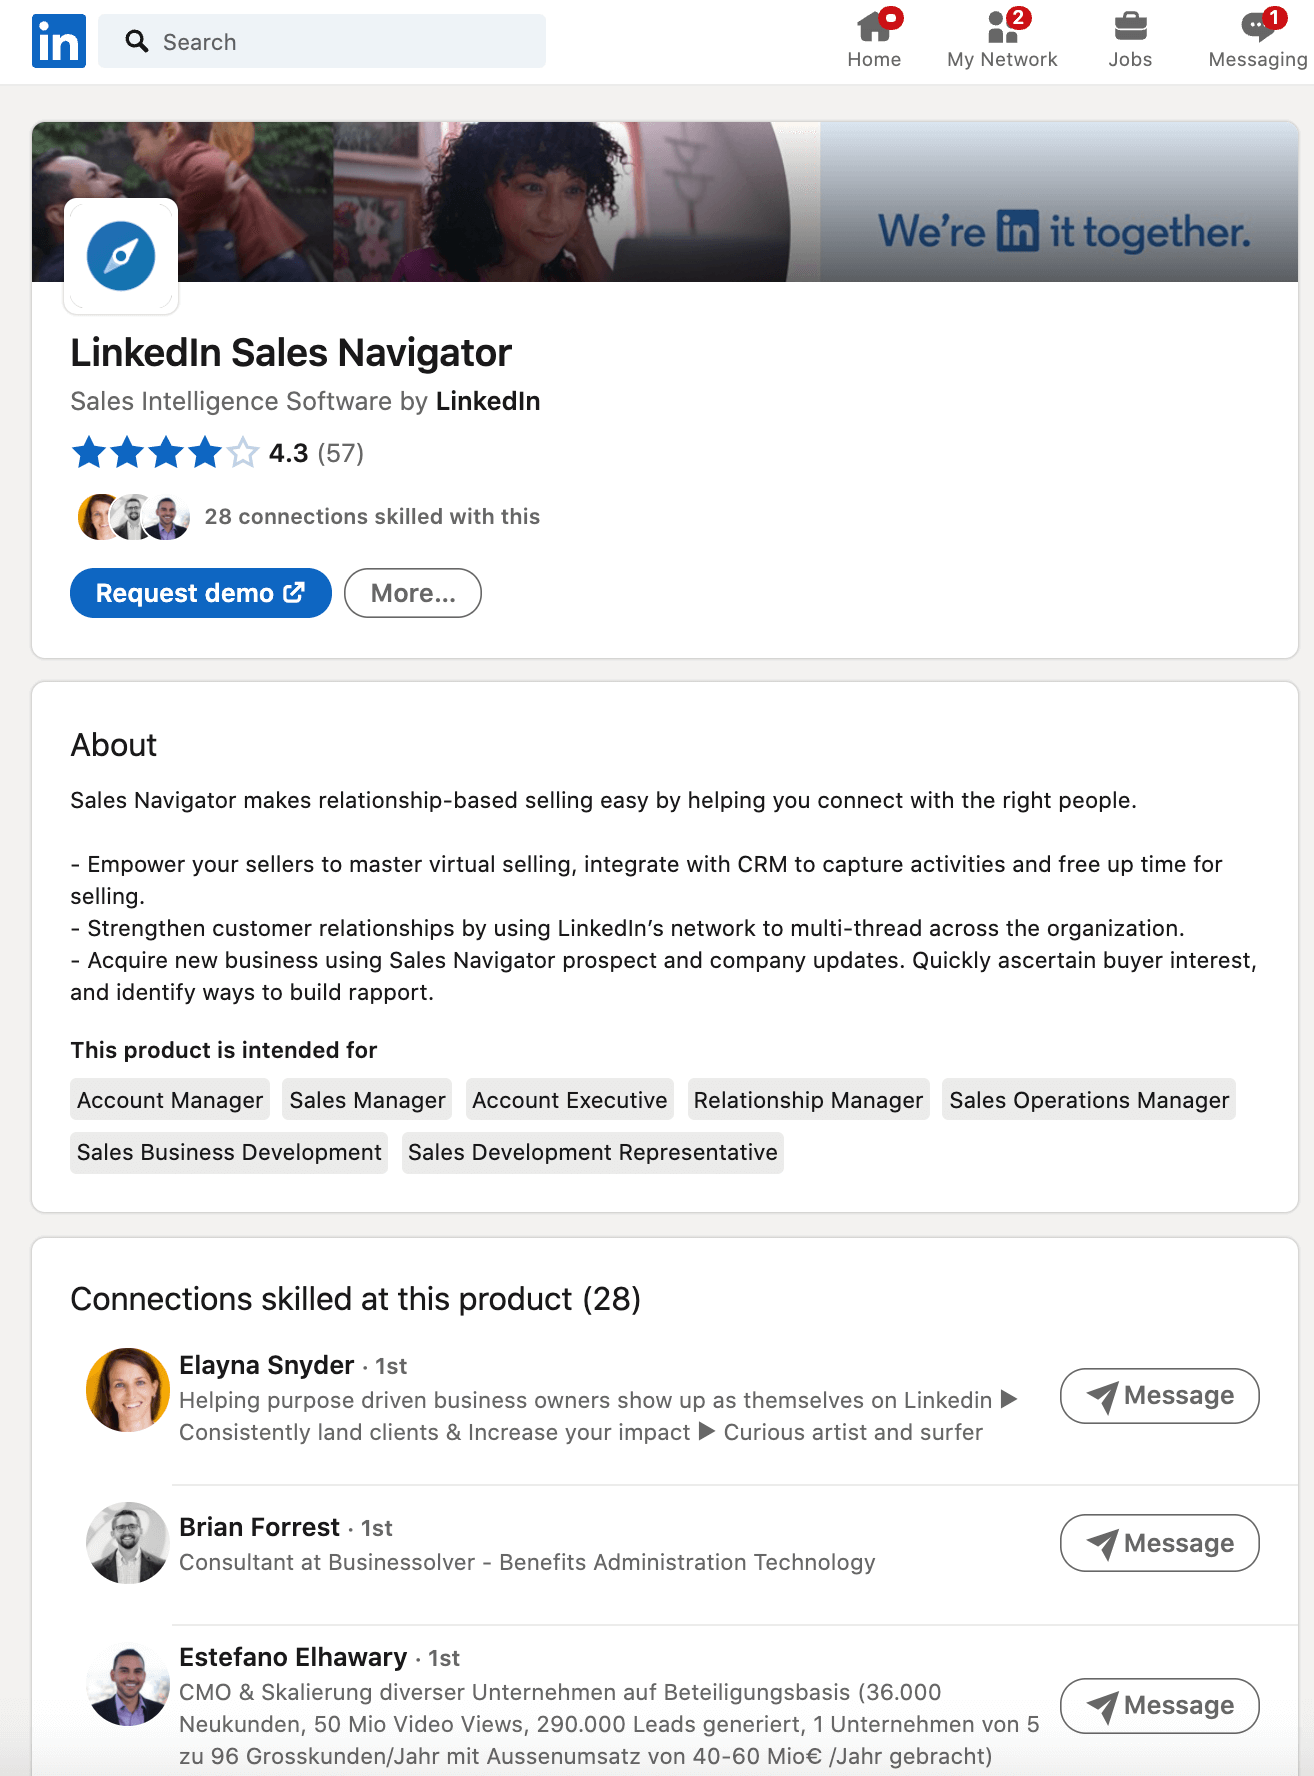 Linkedin Product Pages & Product Reviews - product page